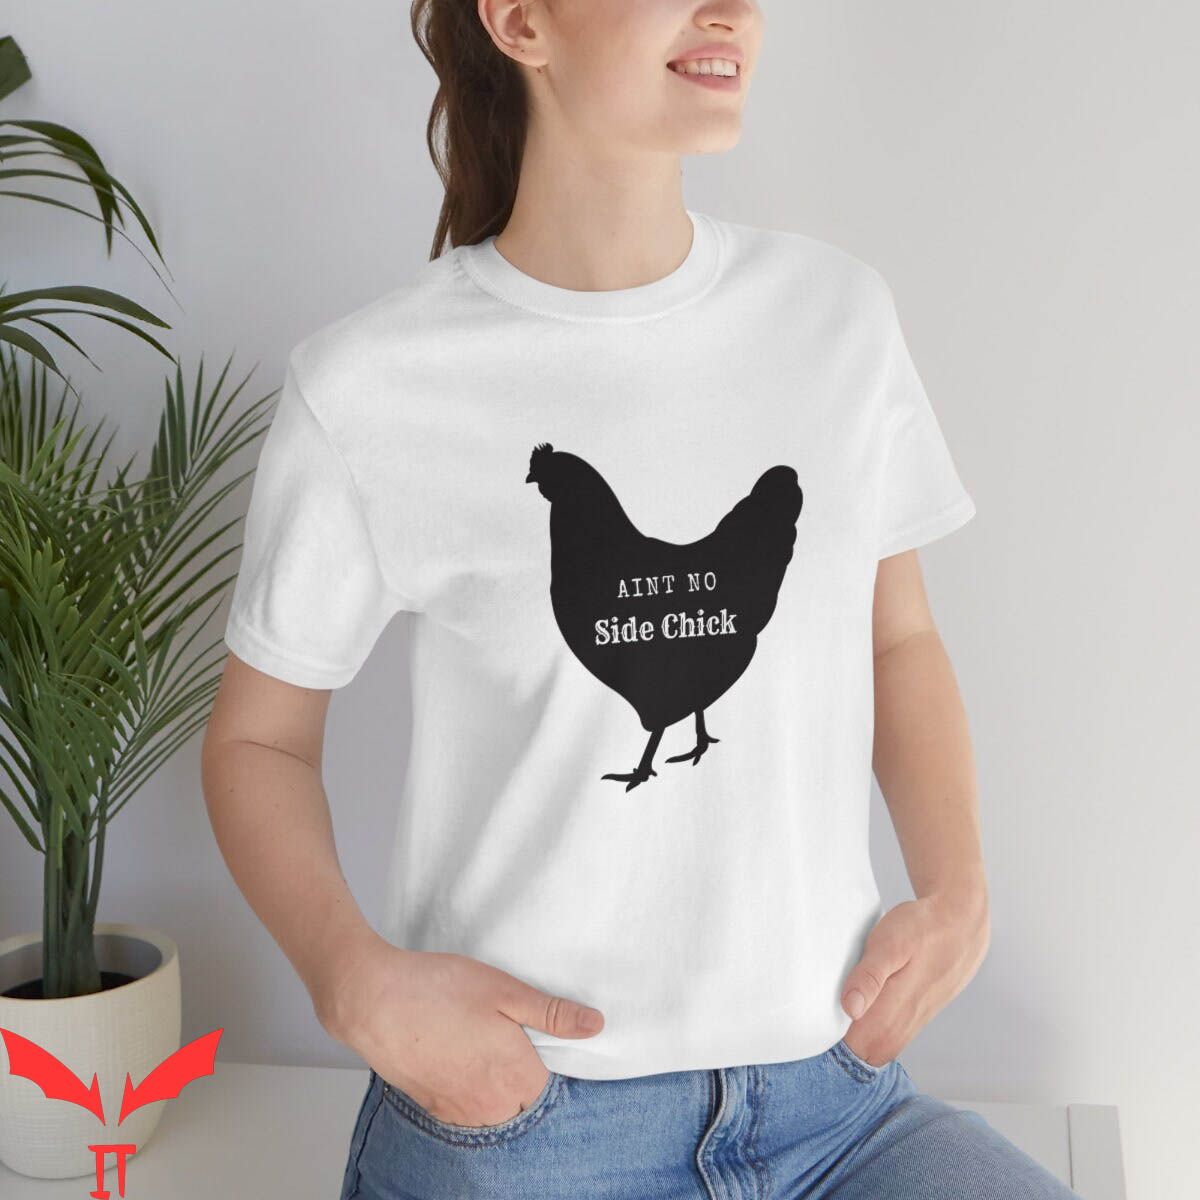 Side Chick T-Shirt Ain't No Side Chick Chicken Tee Shirt